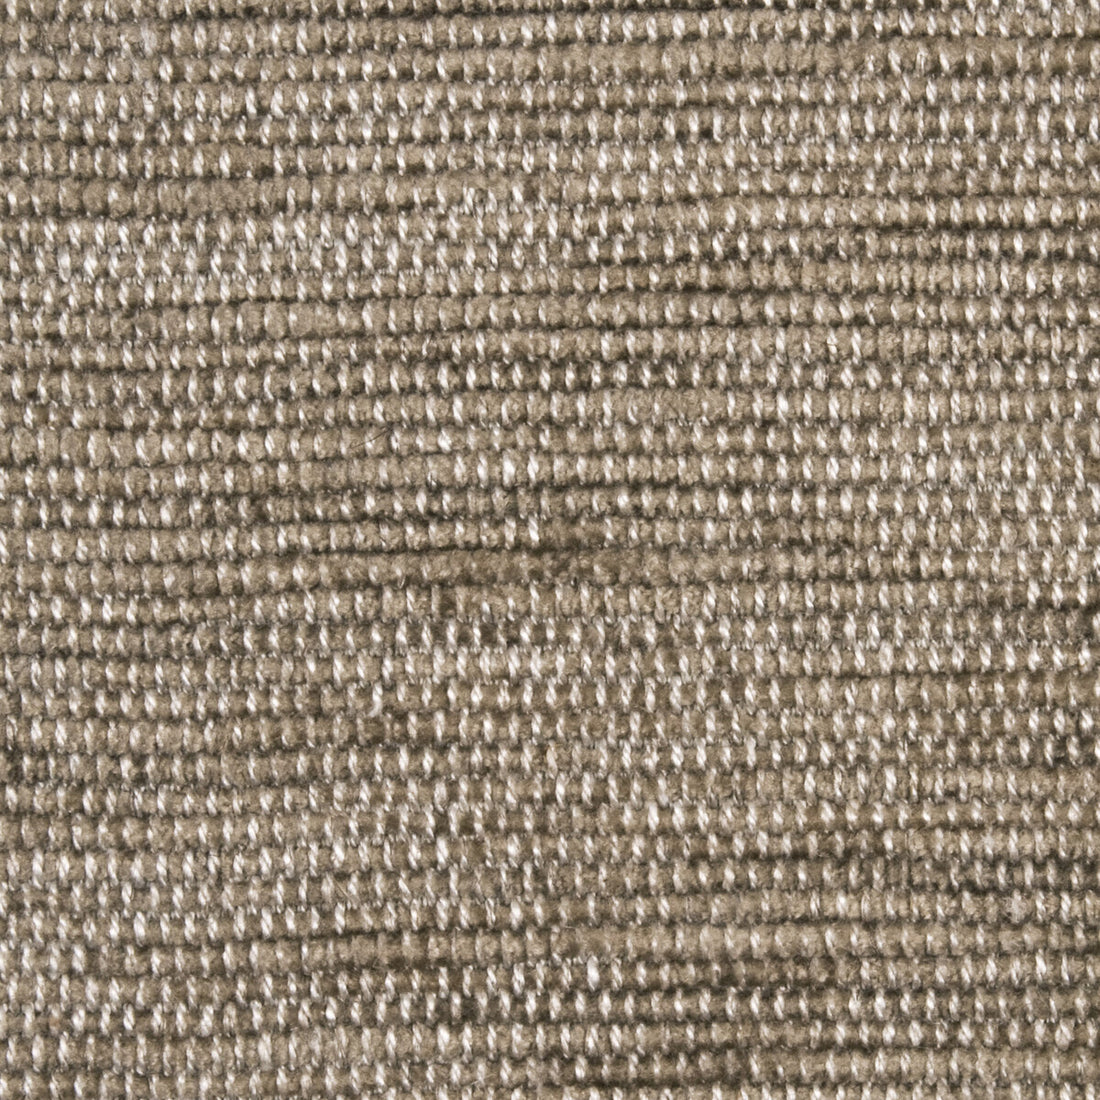 Charisma fabric in mocha color - pattern ED85189.205.0 - by Threads in the Threads Colour Library collection